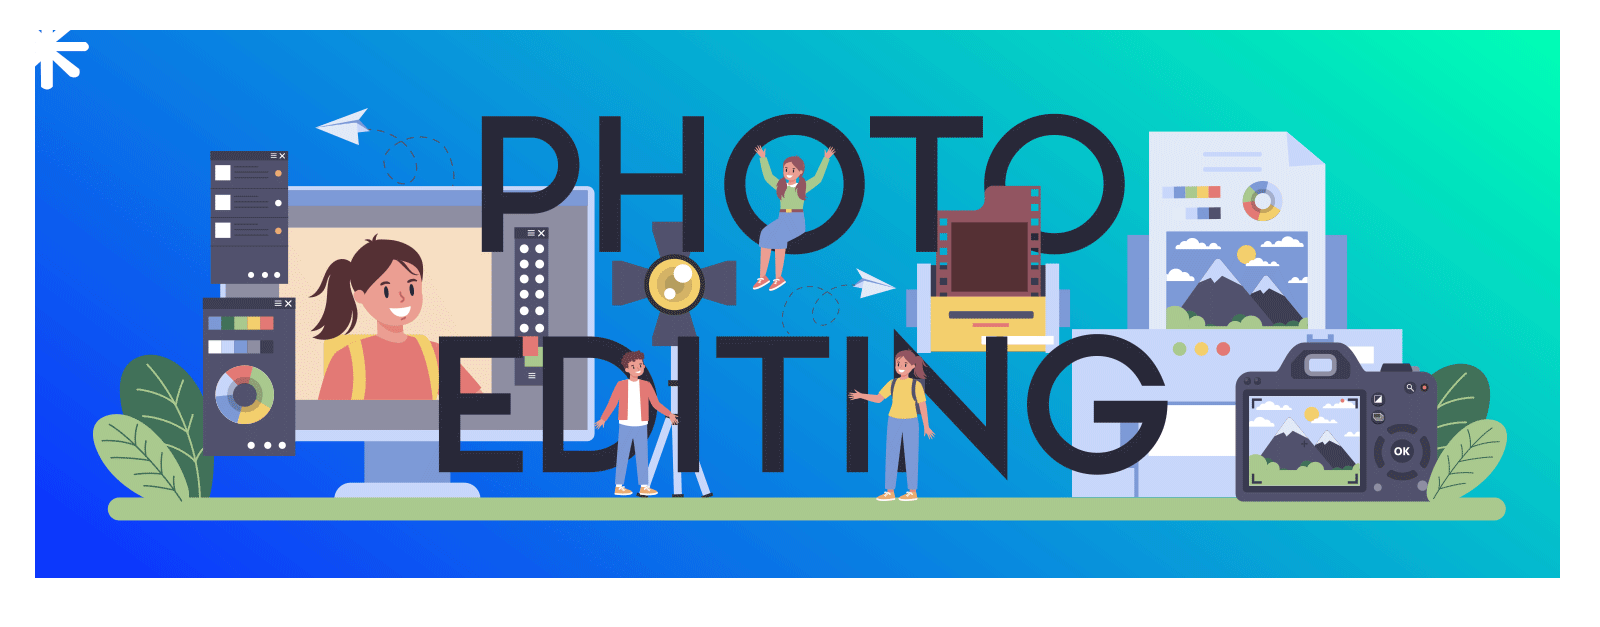 Product images & photo editing is a must for amazon sellers